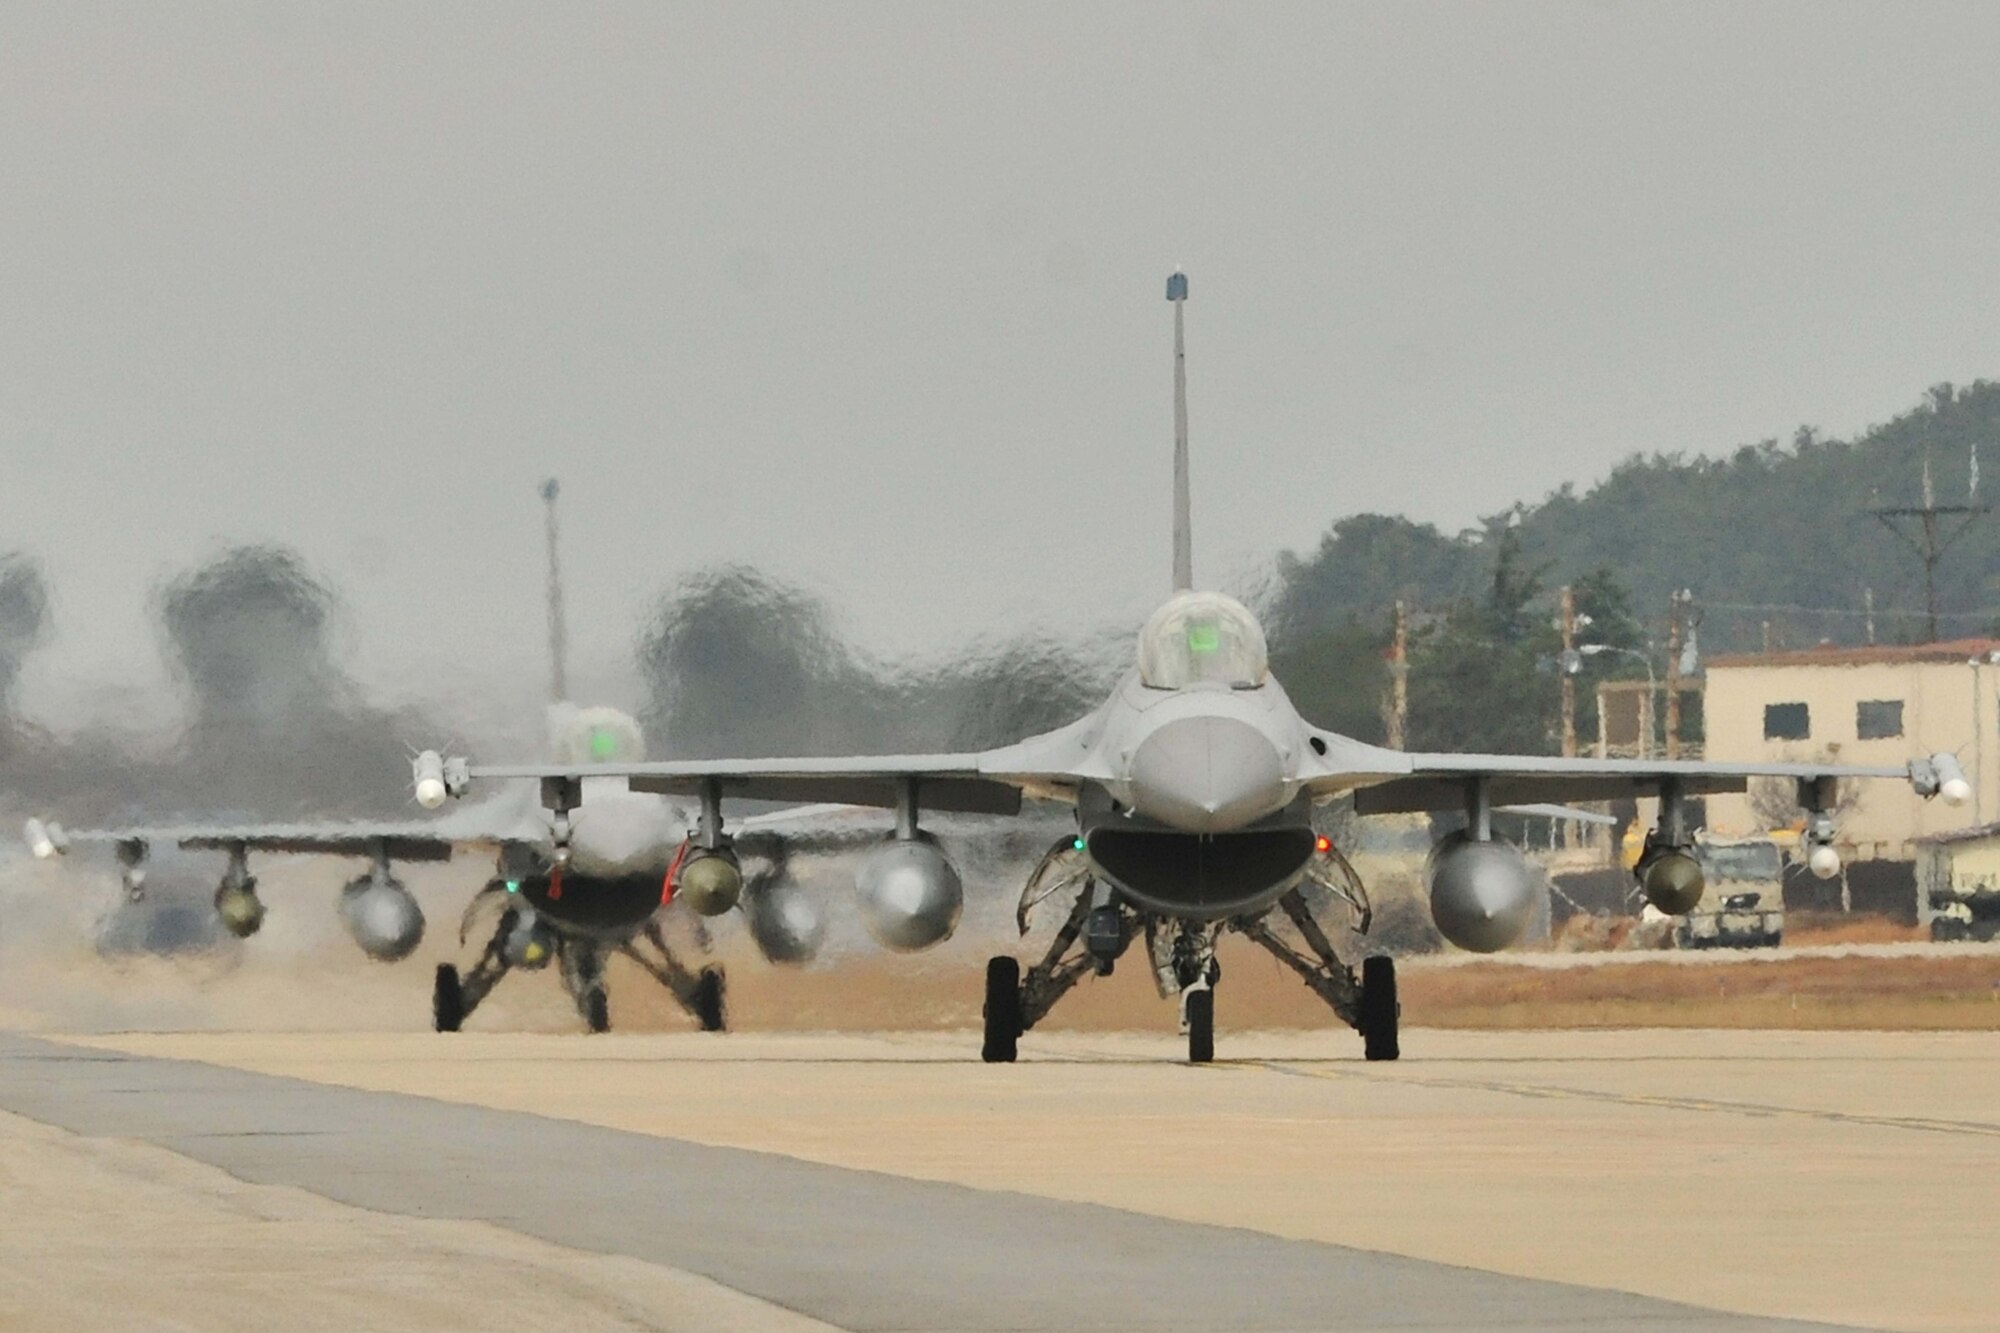 F-16 Fighting Falcons from both the 35th and 80th Fighter Squadrons of the 8th Fighter Wing, as well as from the 466th Fighter Squadron of the 419th Fighter Wing at Hill Air Force Base, Utah, demonstrate an elephant walk formation as they taxi down a runway during an exercise at Kunsan Air Base, Republic of Korea Dec. 2, 2011. The exercise showcased Kunsan AB aircrews' capability to quickly and safely prepare an aircraft for a wartime mission.  (U.S. Air Force photo by Senior Airman Brittany Y. Auld/Released)